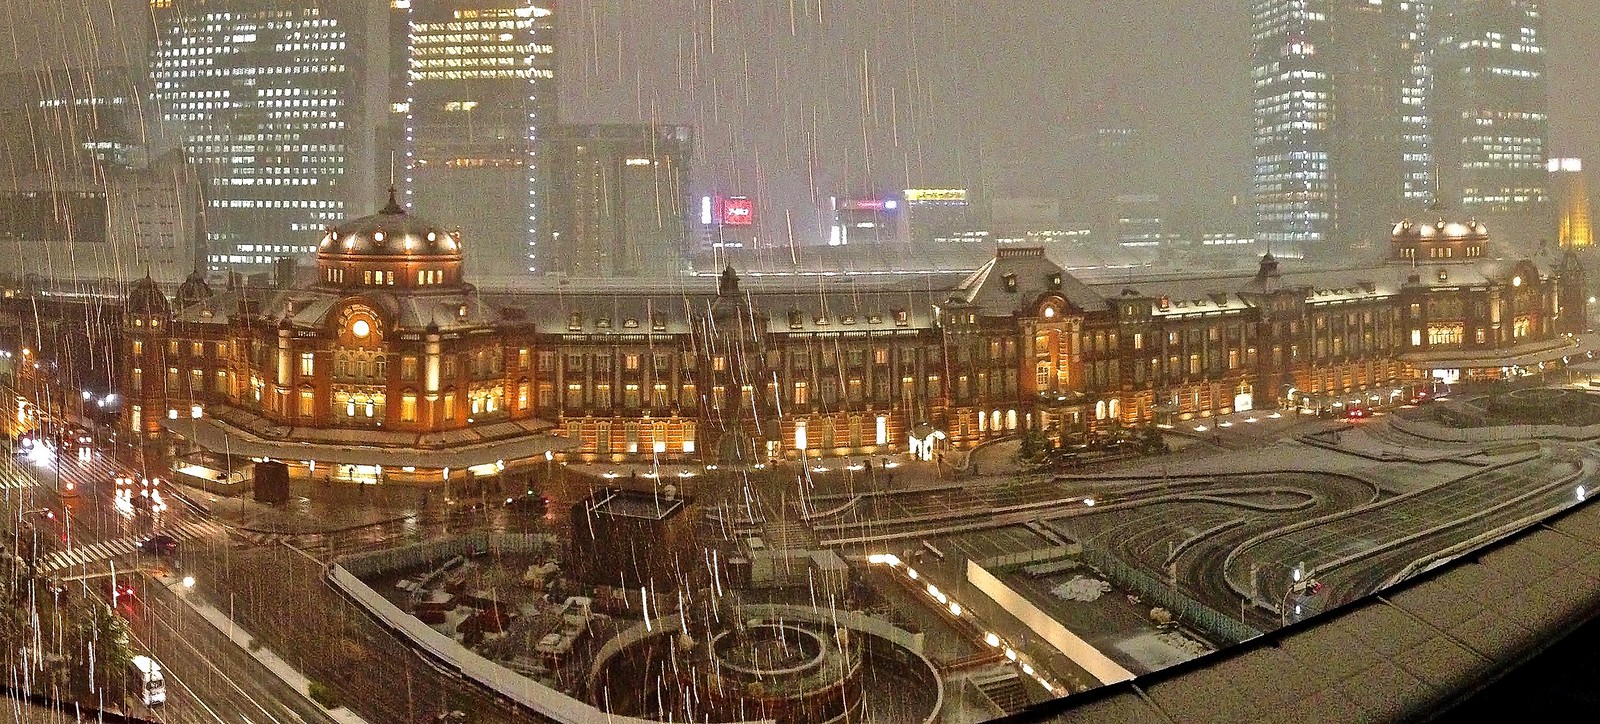 Tokyo Station panorama shot in the snow